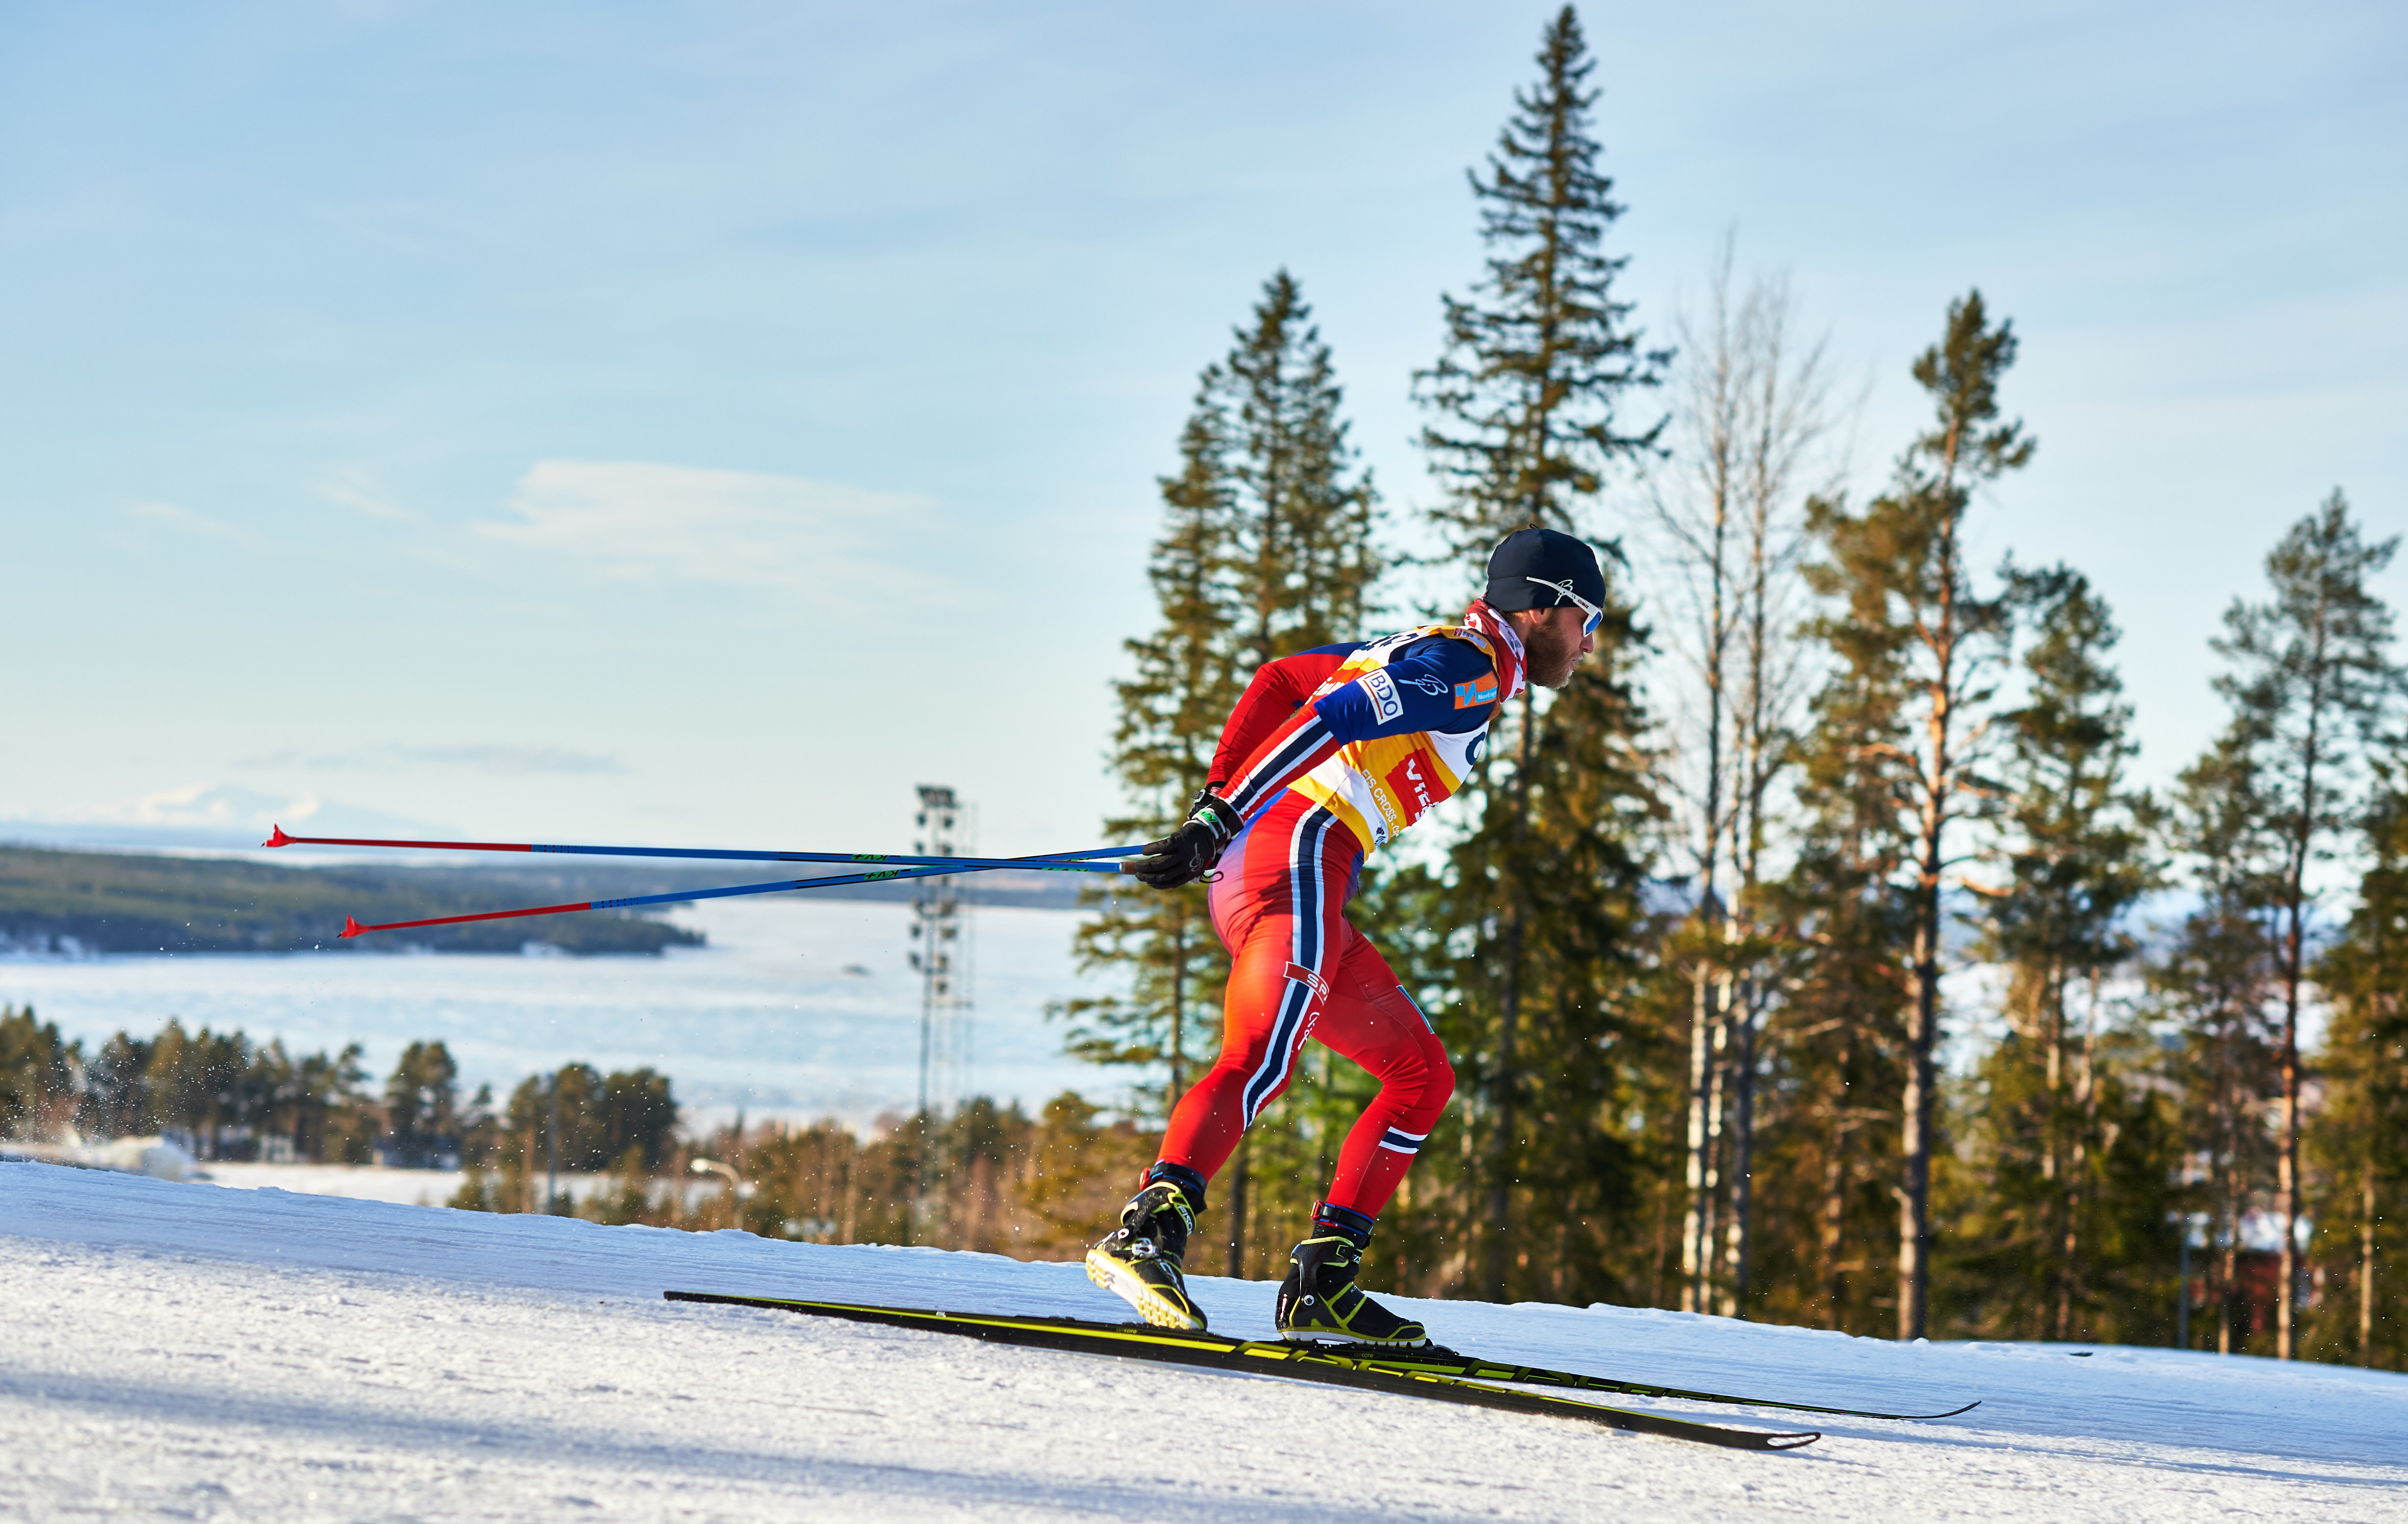 Martin Johnsrud Sundby placed 12th in the 15 k skate World Cup in Oestersund, Sweden, in February 2015 - one day after FIS decided to cancel his scheduled Anti-Doping Hearing Panel and instead subject him to lab tests to determine how much salbutamol showed up in a urine sample after using a nebulizer as he had described. That trial eventually took place in April, long after the World Cup season (and Sundby's victory for the overall title) had wrapped up. (Photo: Fischer/Nordic-Focus.com)